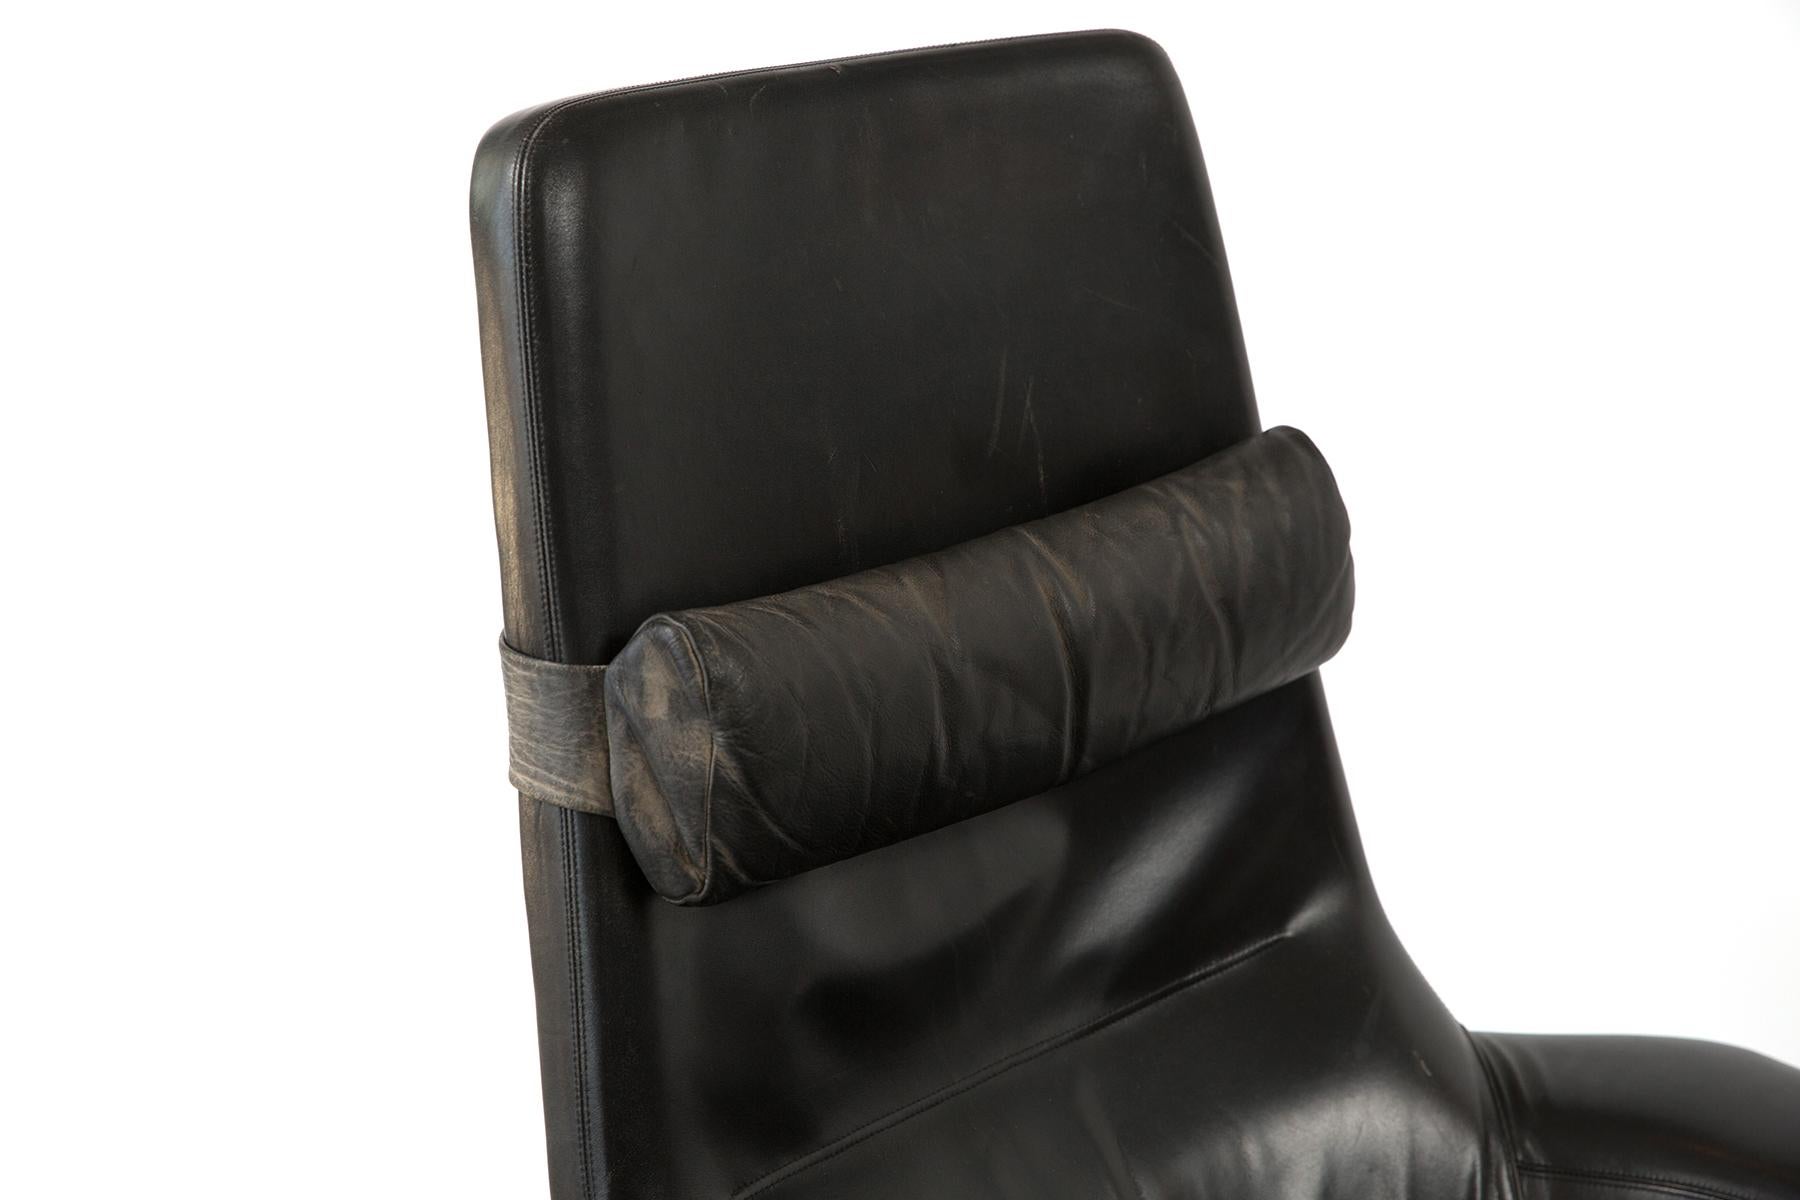 This handsome Kofod Larsen black leather lounger is complete with matching ottoman and headrest cushion. The set currently sports original leather with all of its well-loved appeal. Let Red Modern assist you with any reupholstery choices, or keep it